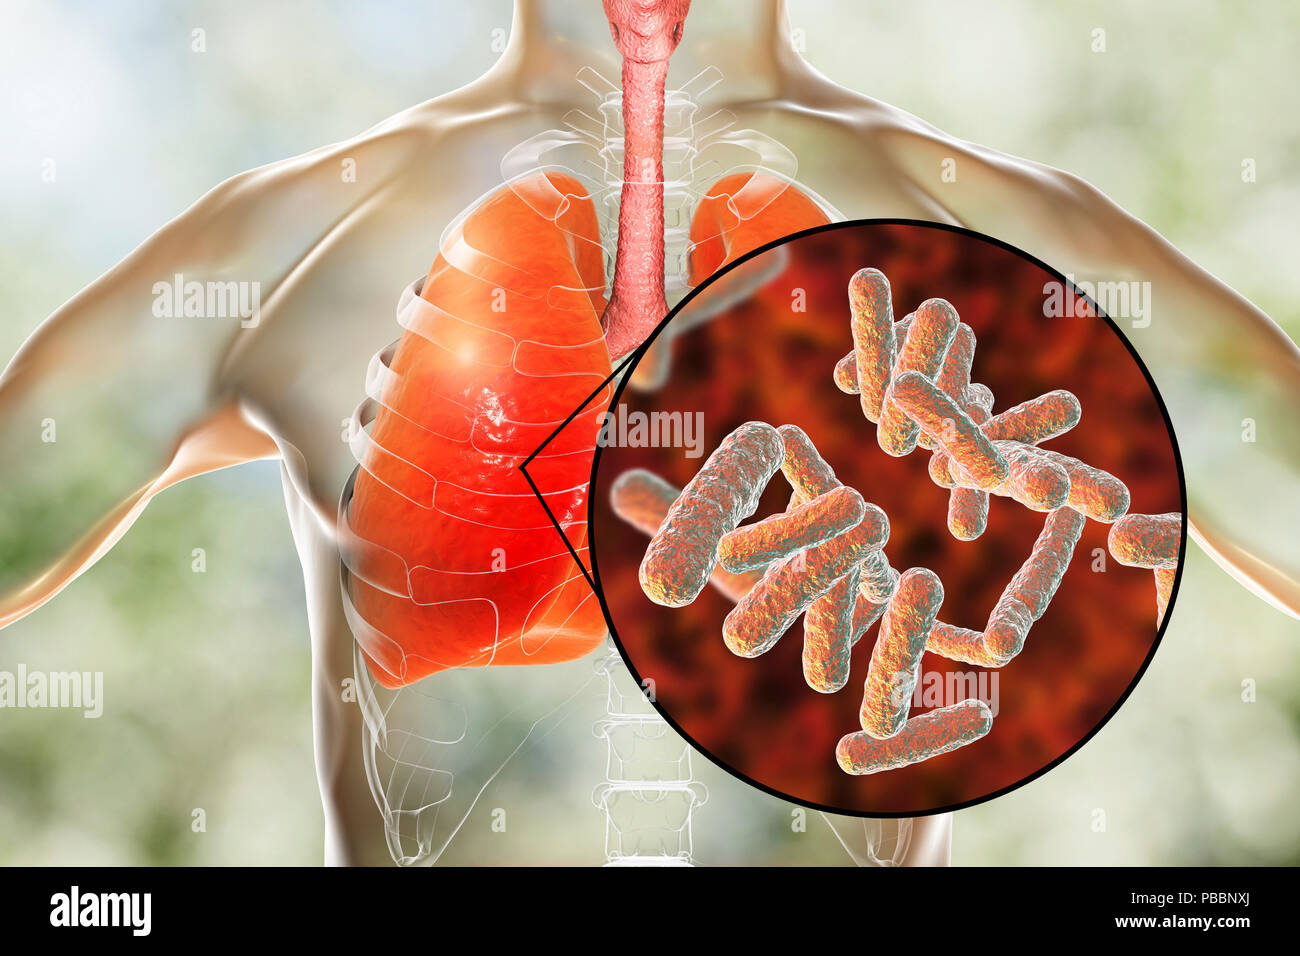 Bacterial pneumonia, conceptual illustration. Human lungs and close-up view of bacteria, one of the causative agents of pneumonia. Stock Photo